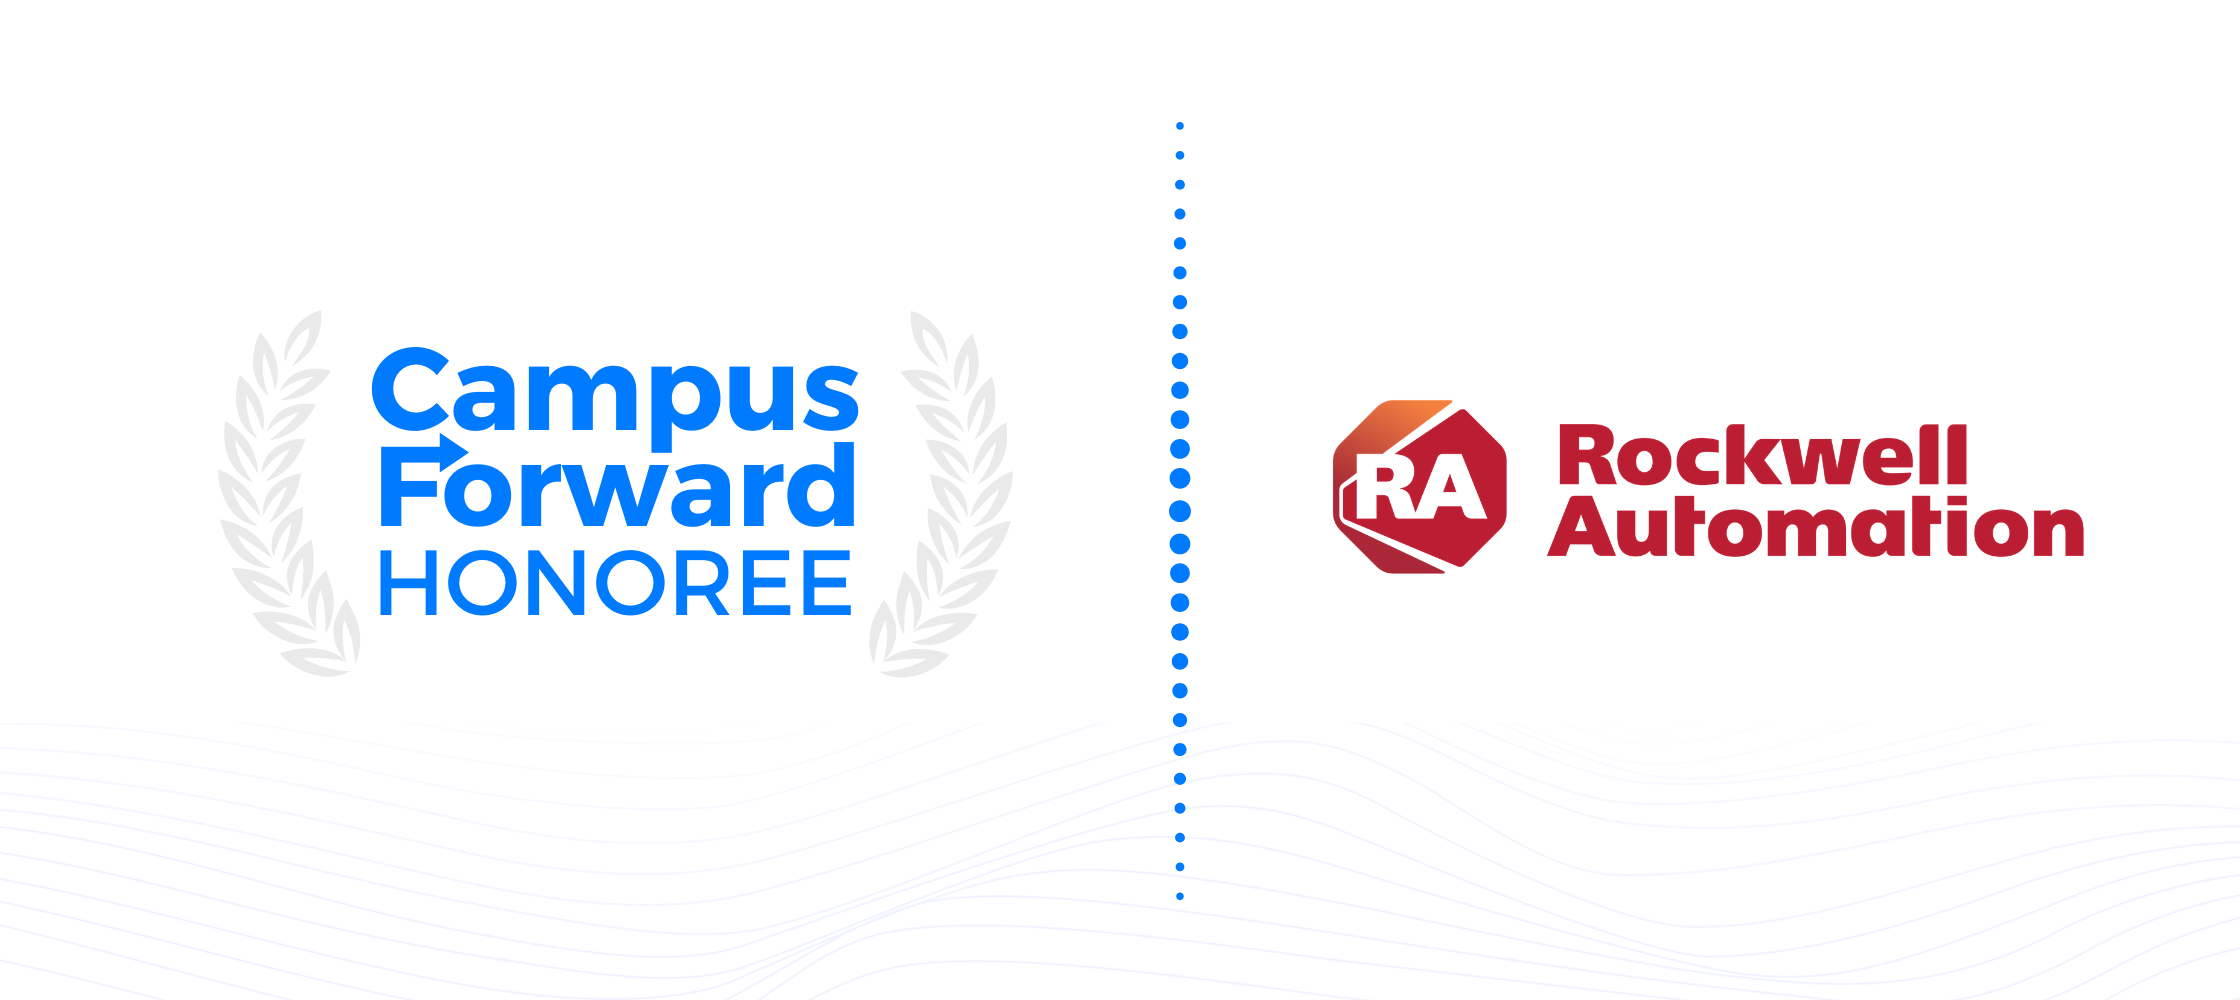 Campus Forward Honoree - Rockwell Automation